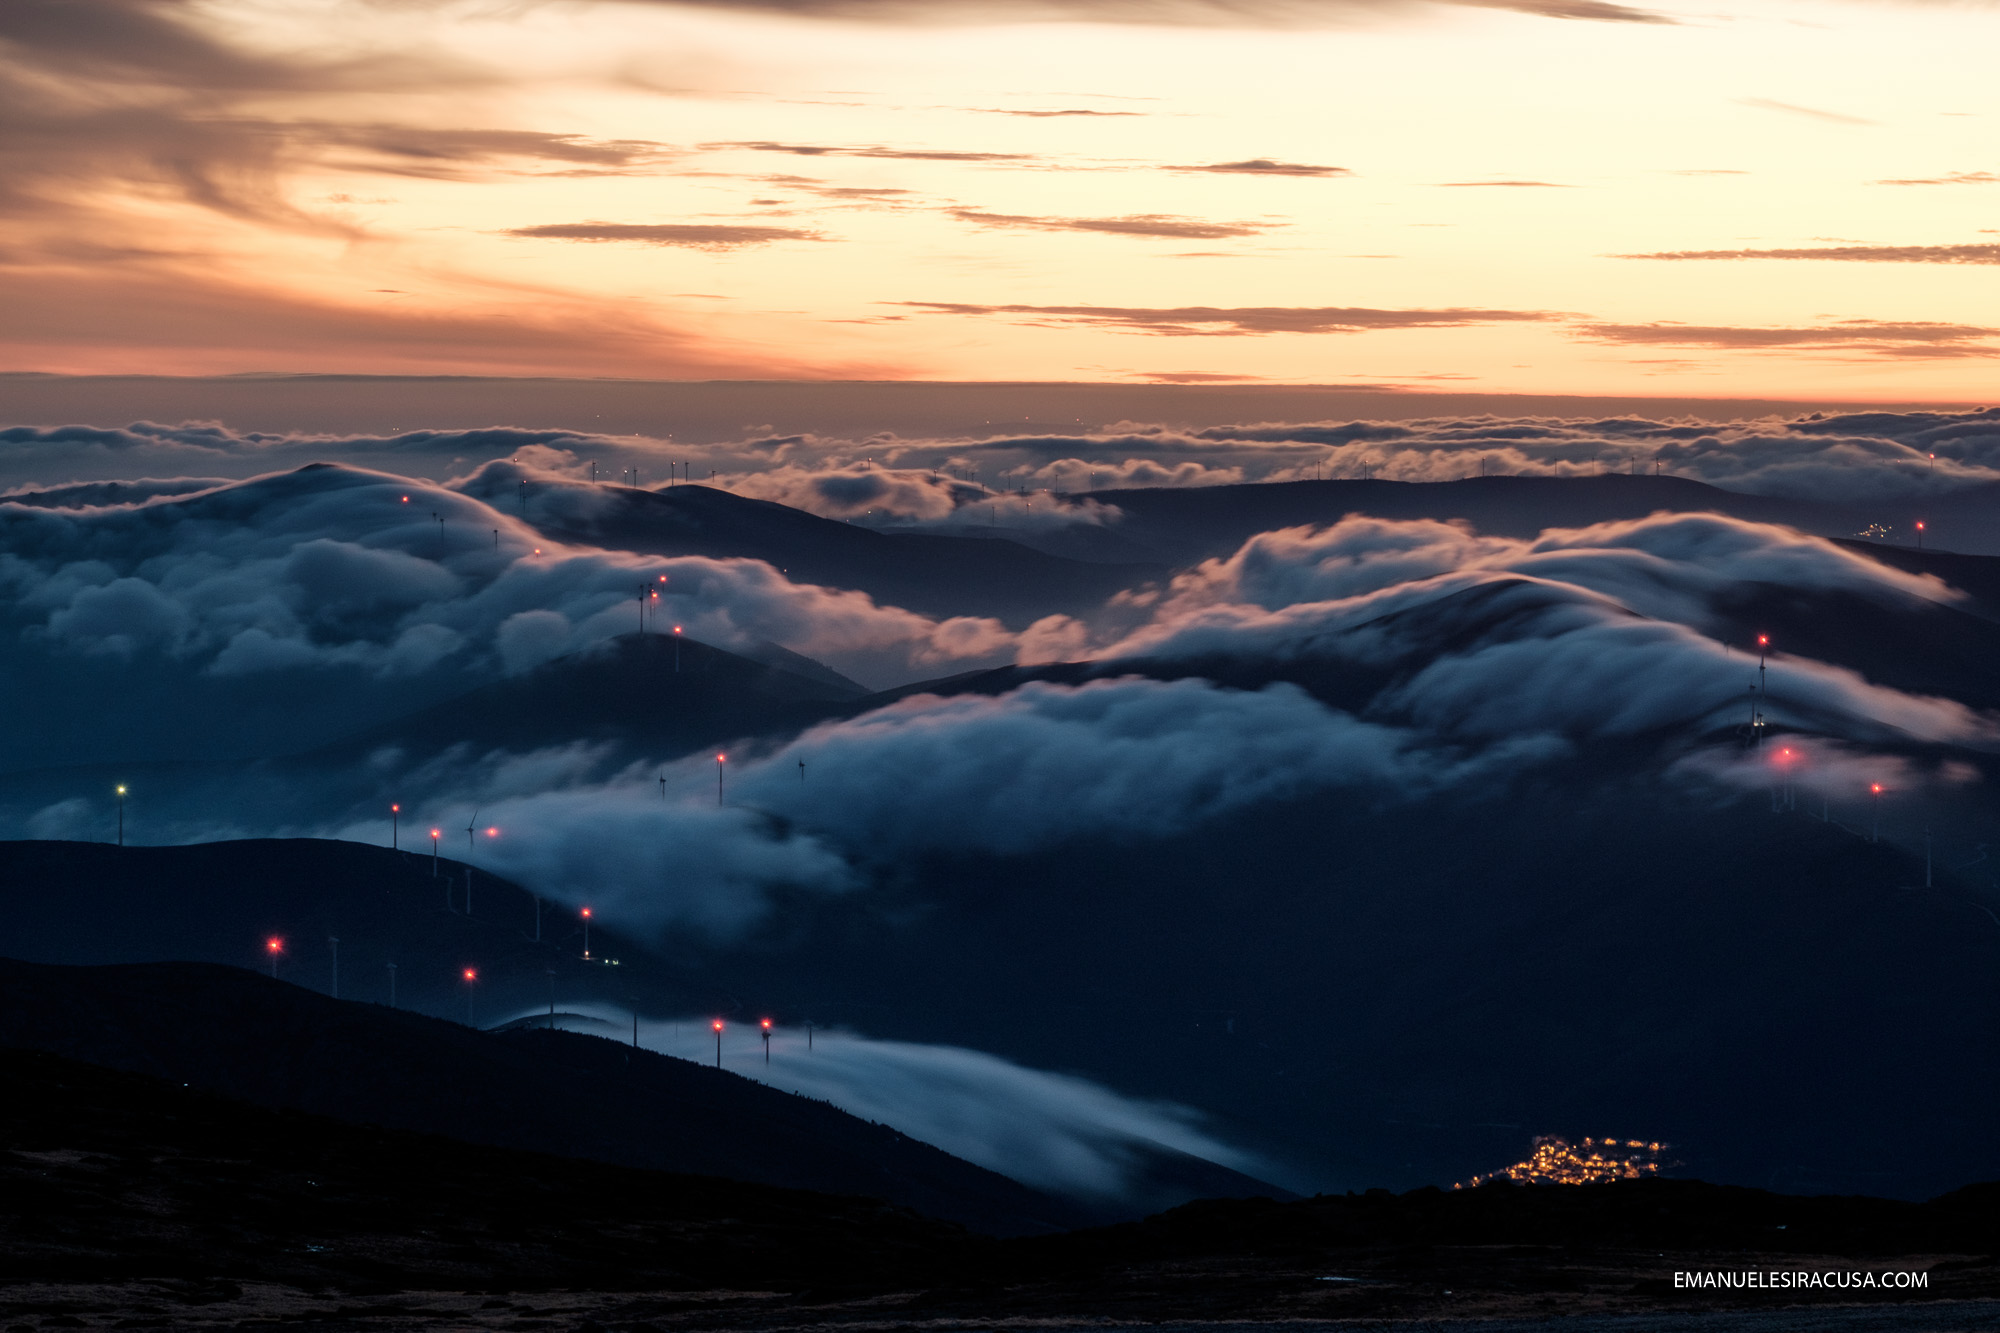 The view from Torre, the top of Serra da Estrela, at about 2000 meters, at twilight.